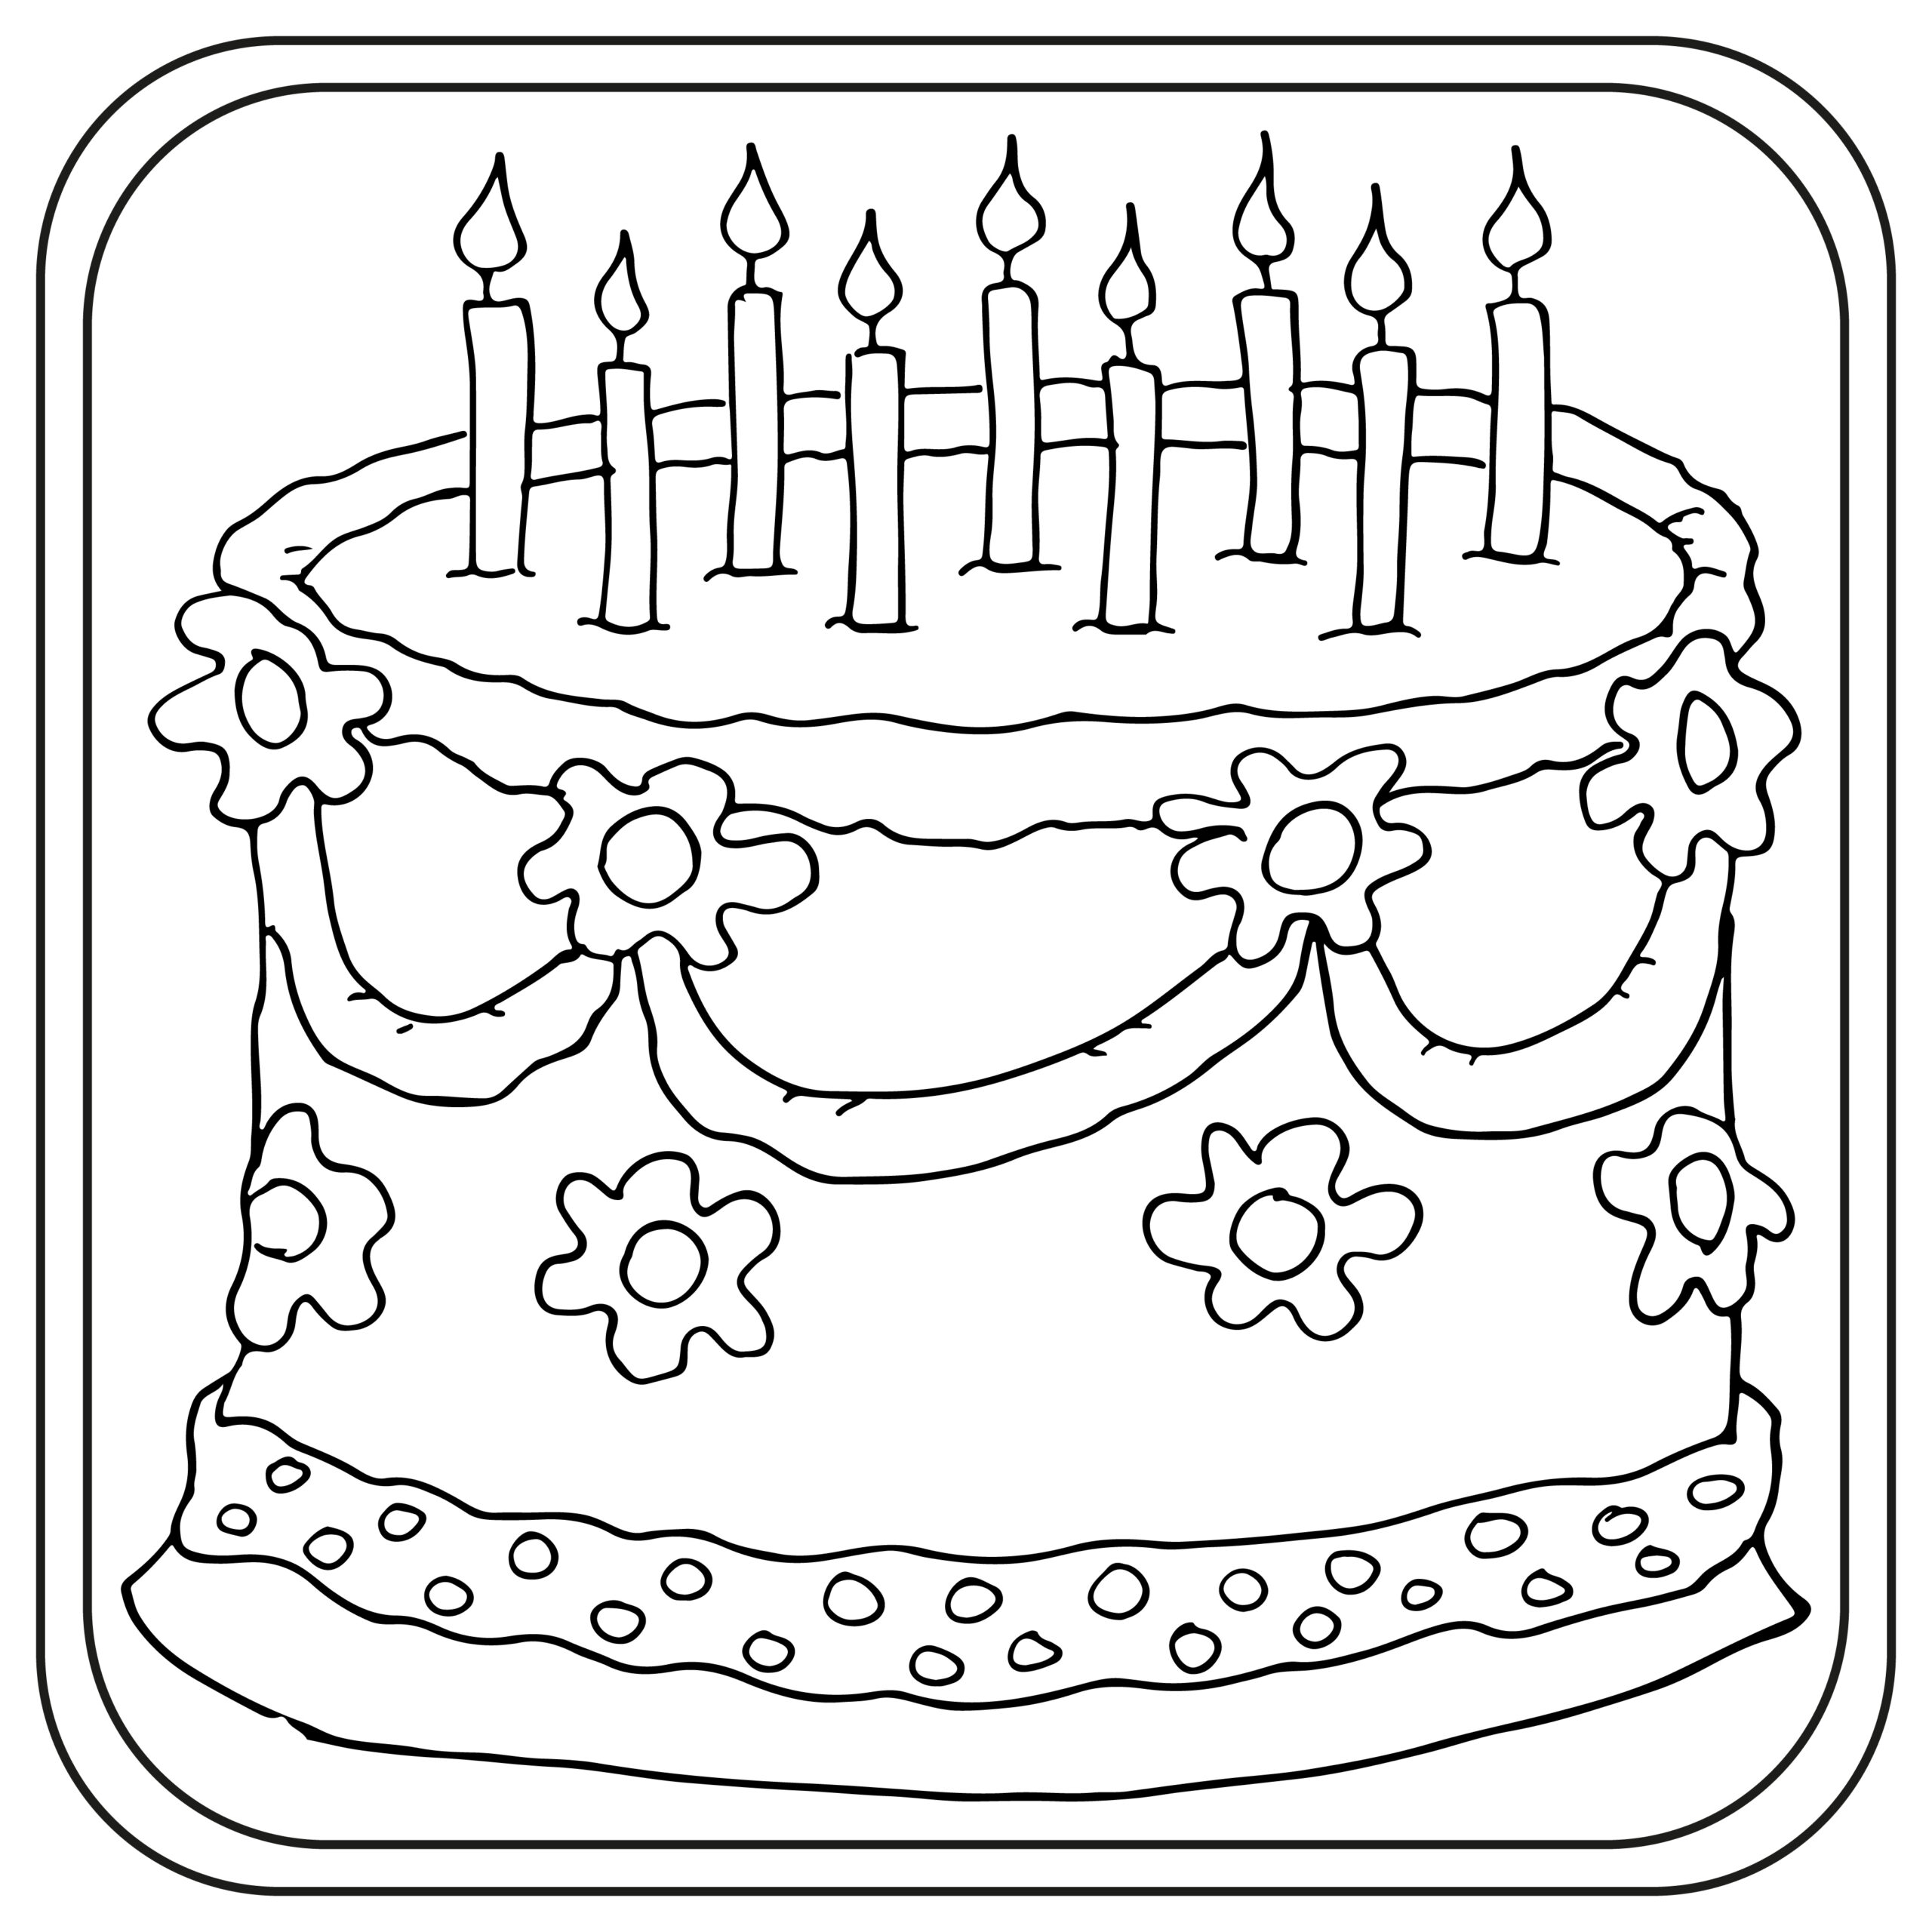 Birthday cake coloring pages preschool kindergarten first grade made by teachers